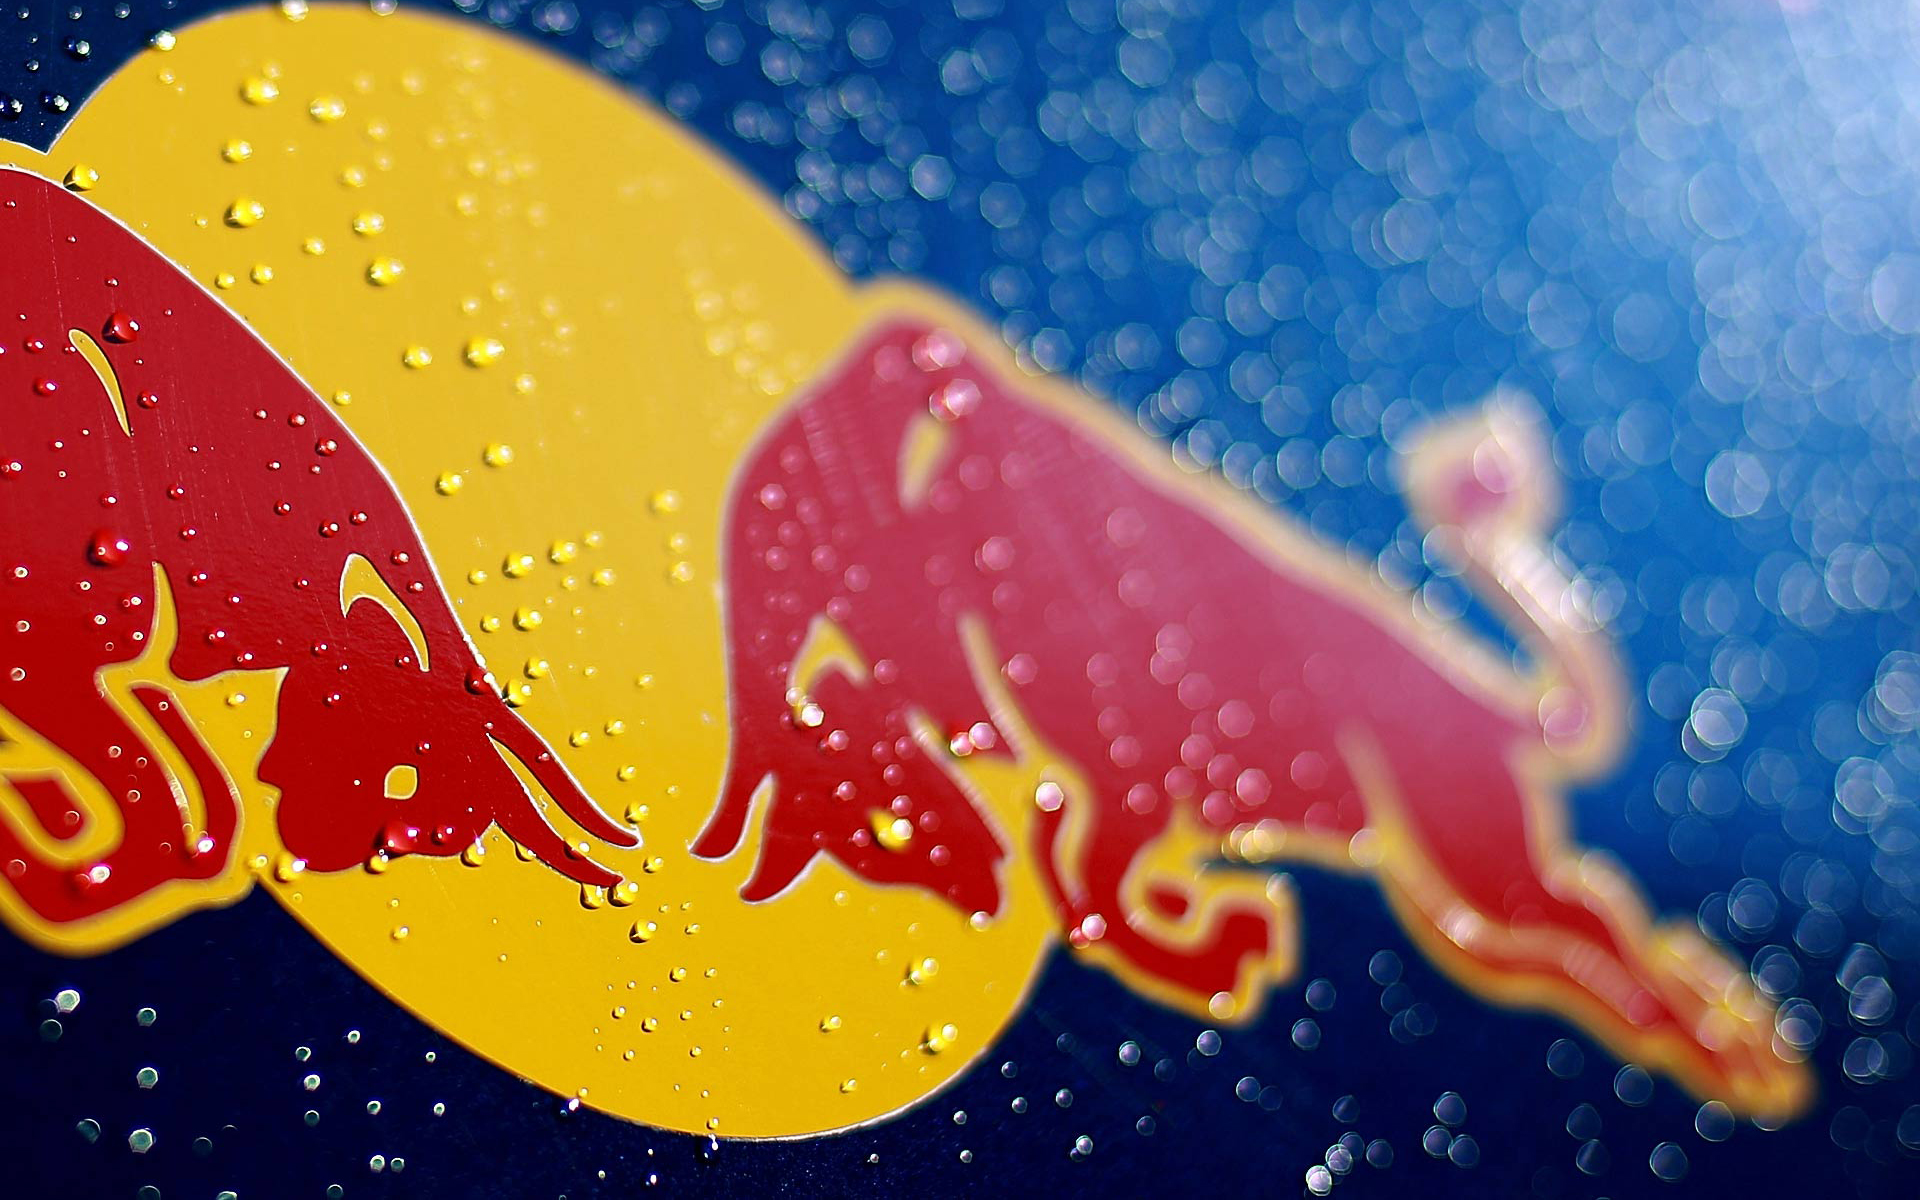 Excellent Red Bull Wallpaper Full HD Pictures